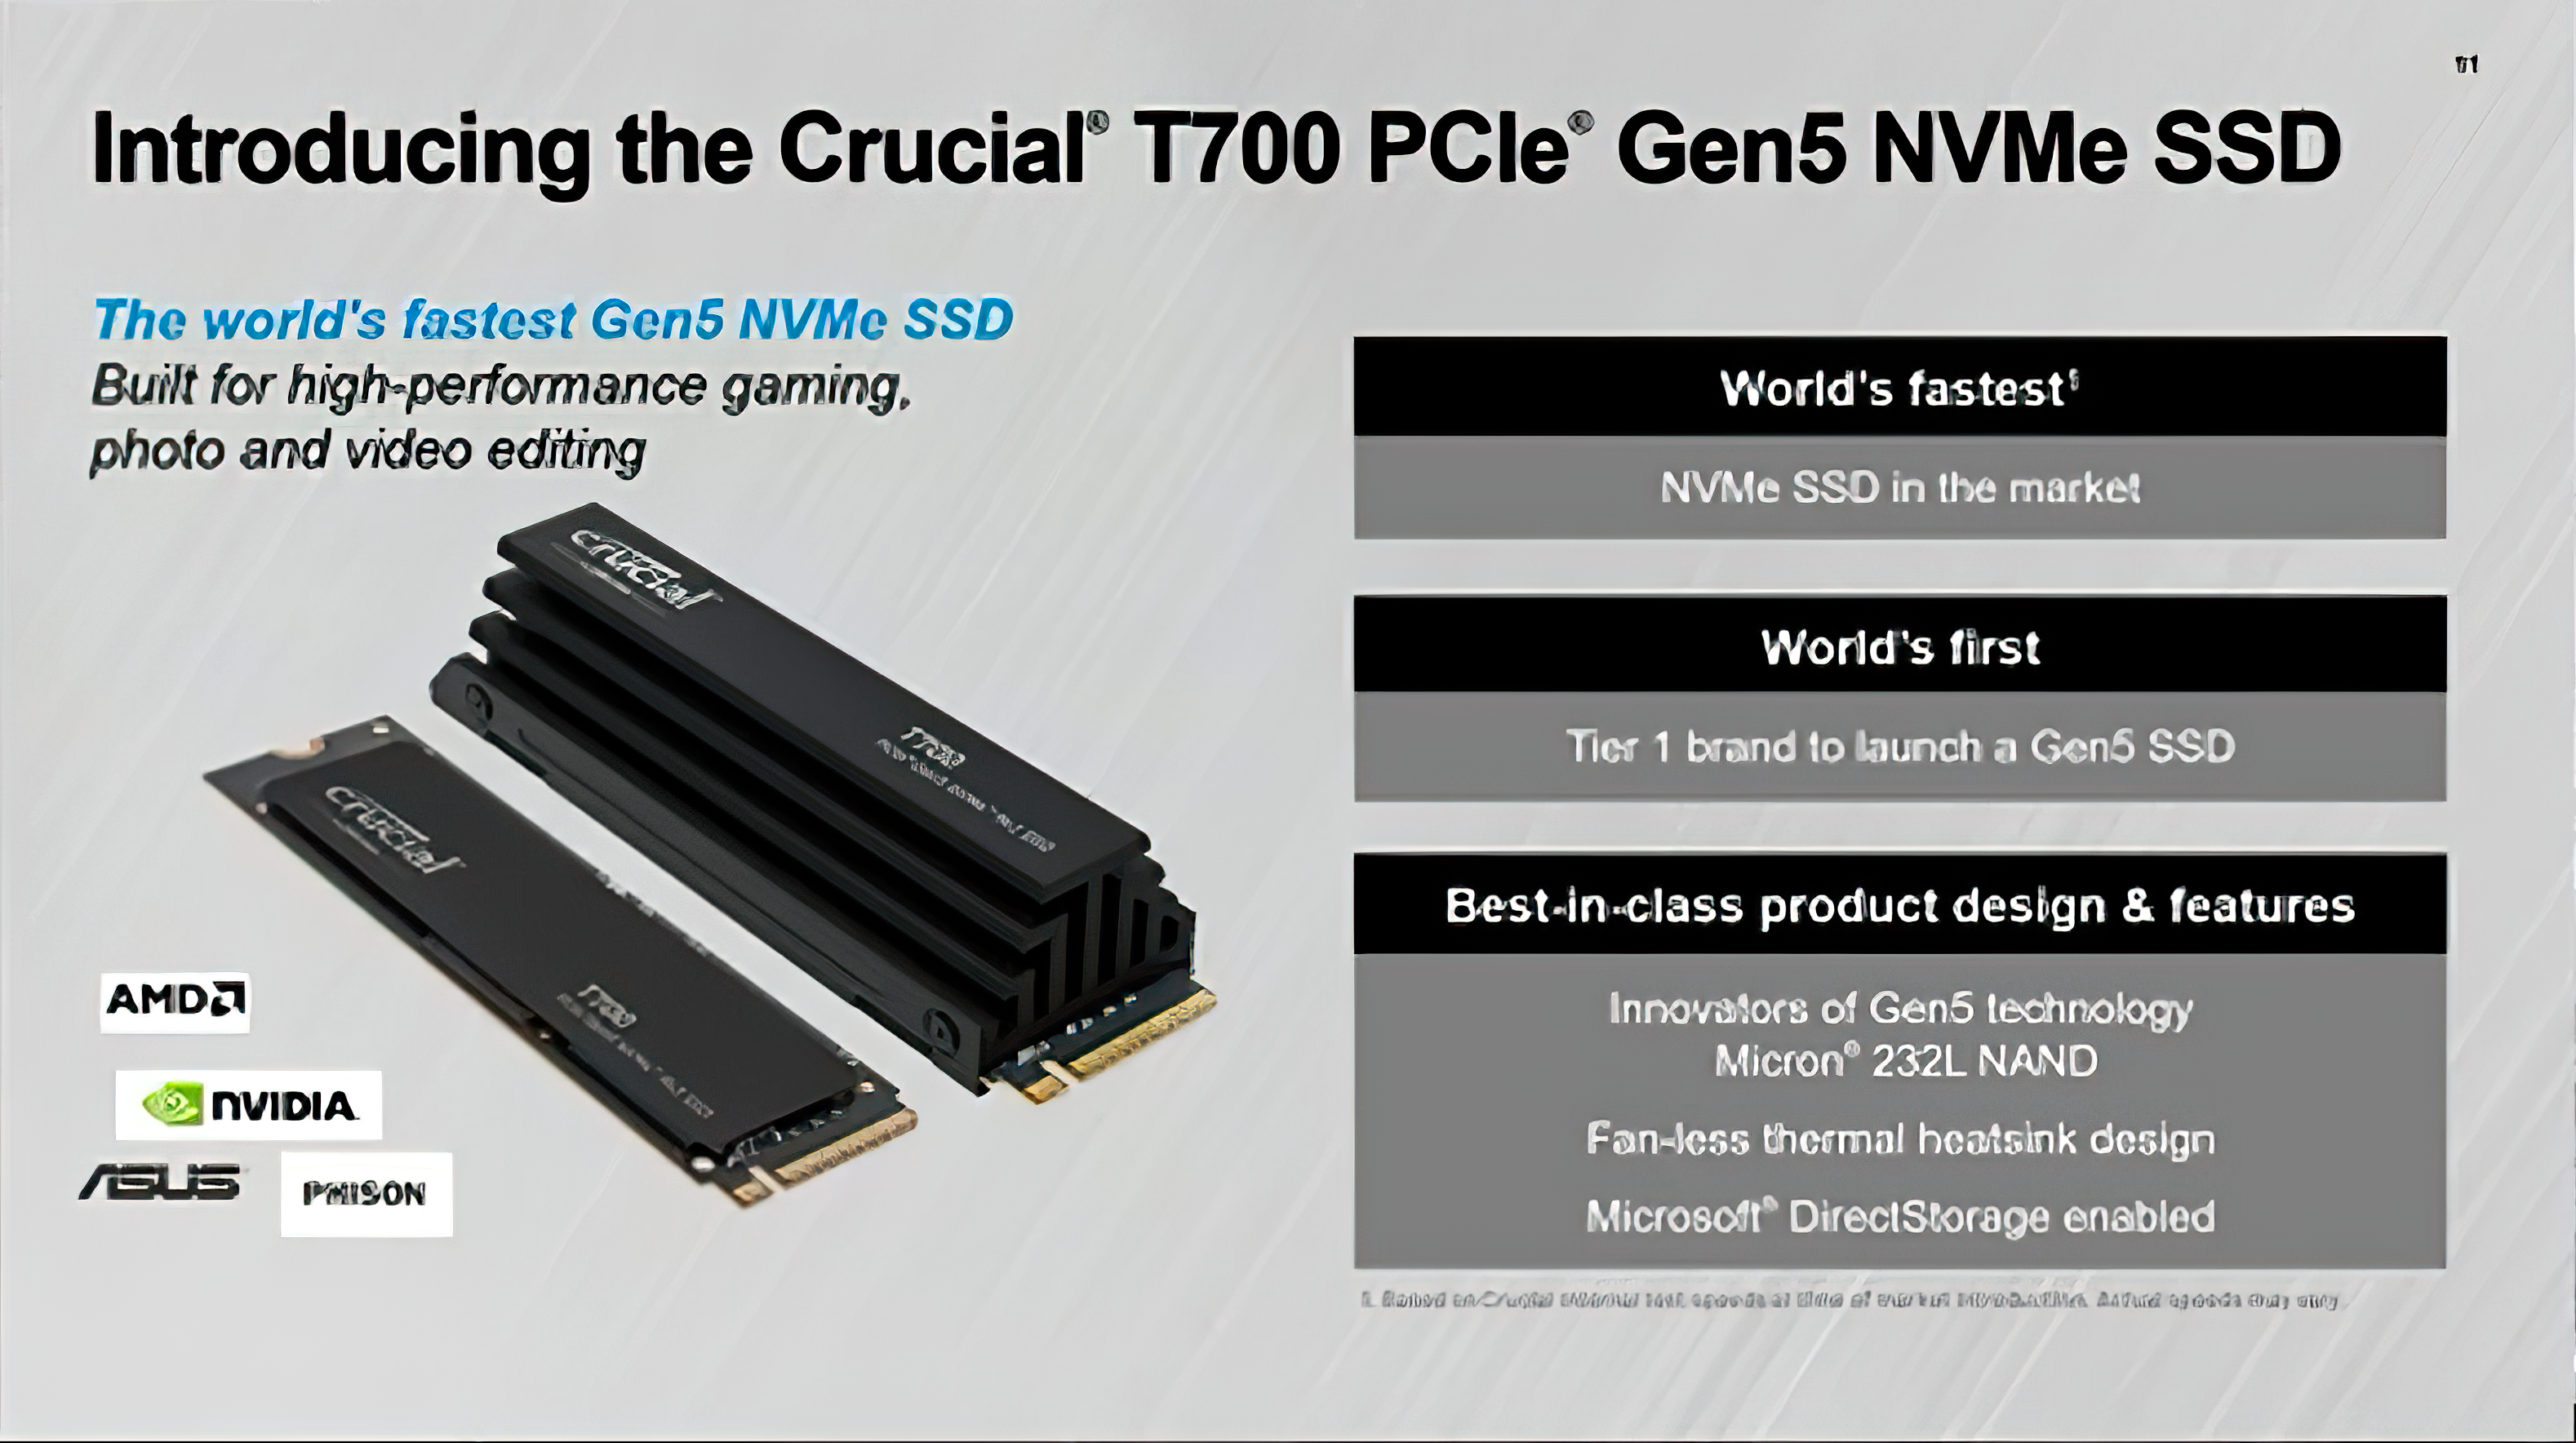 Crucial-T700-Gen5-NVMe-SSD-Phison-Micron-_2-gigapixel-standard-scale-4_00x.png